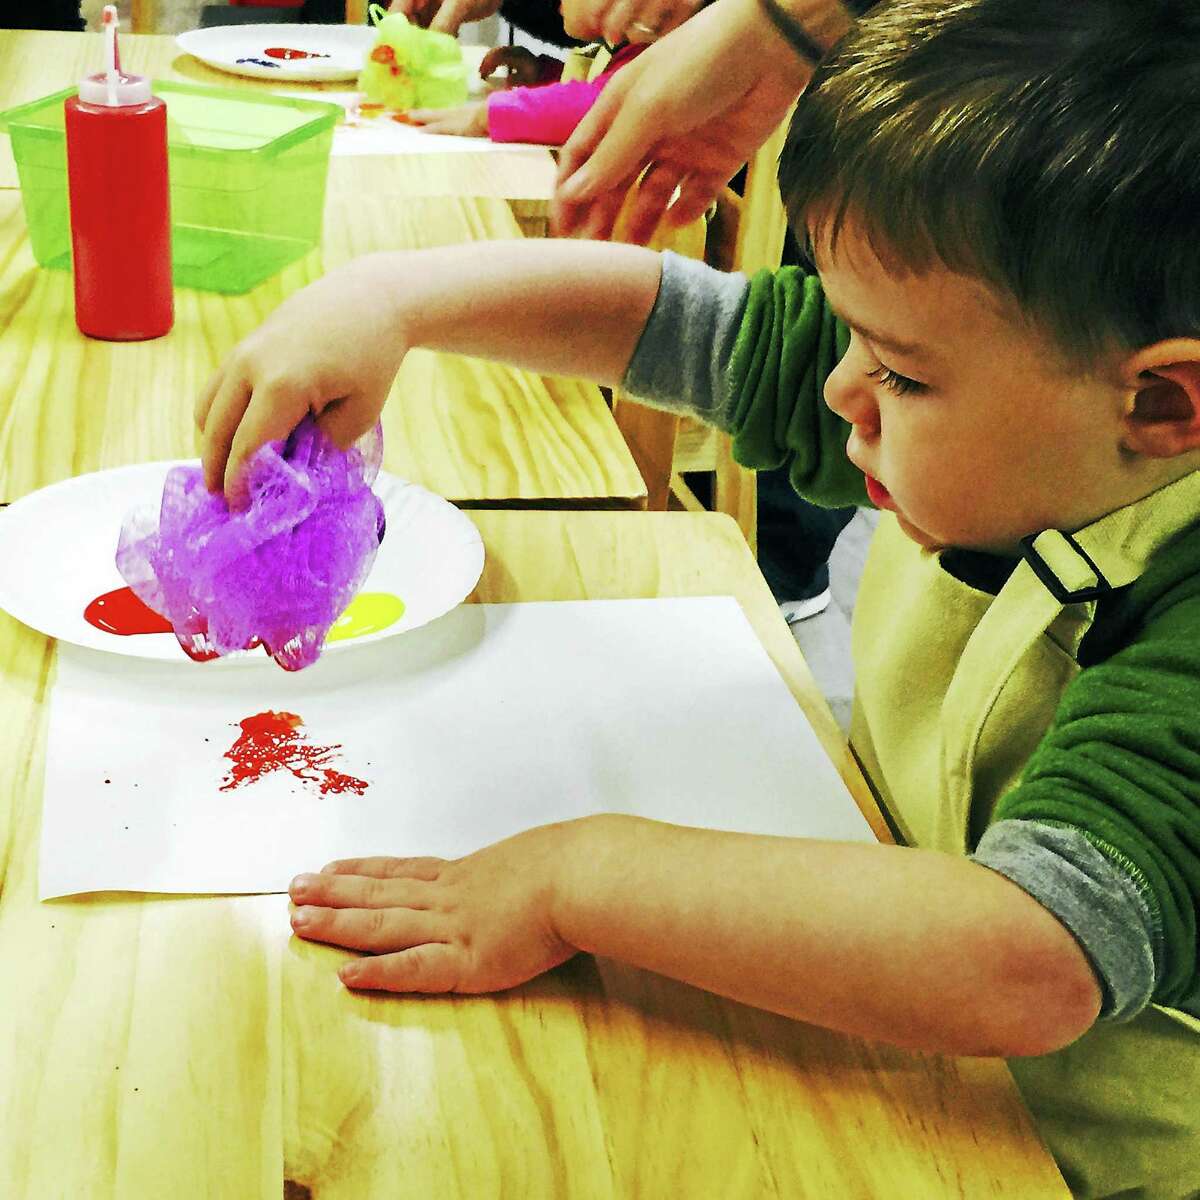 Contributed photoA child creates an abstract pattern during an art session at the Silly Sprout in Litchfield.